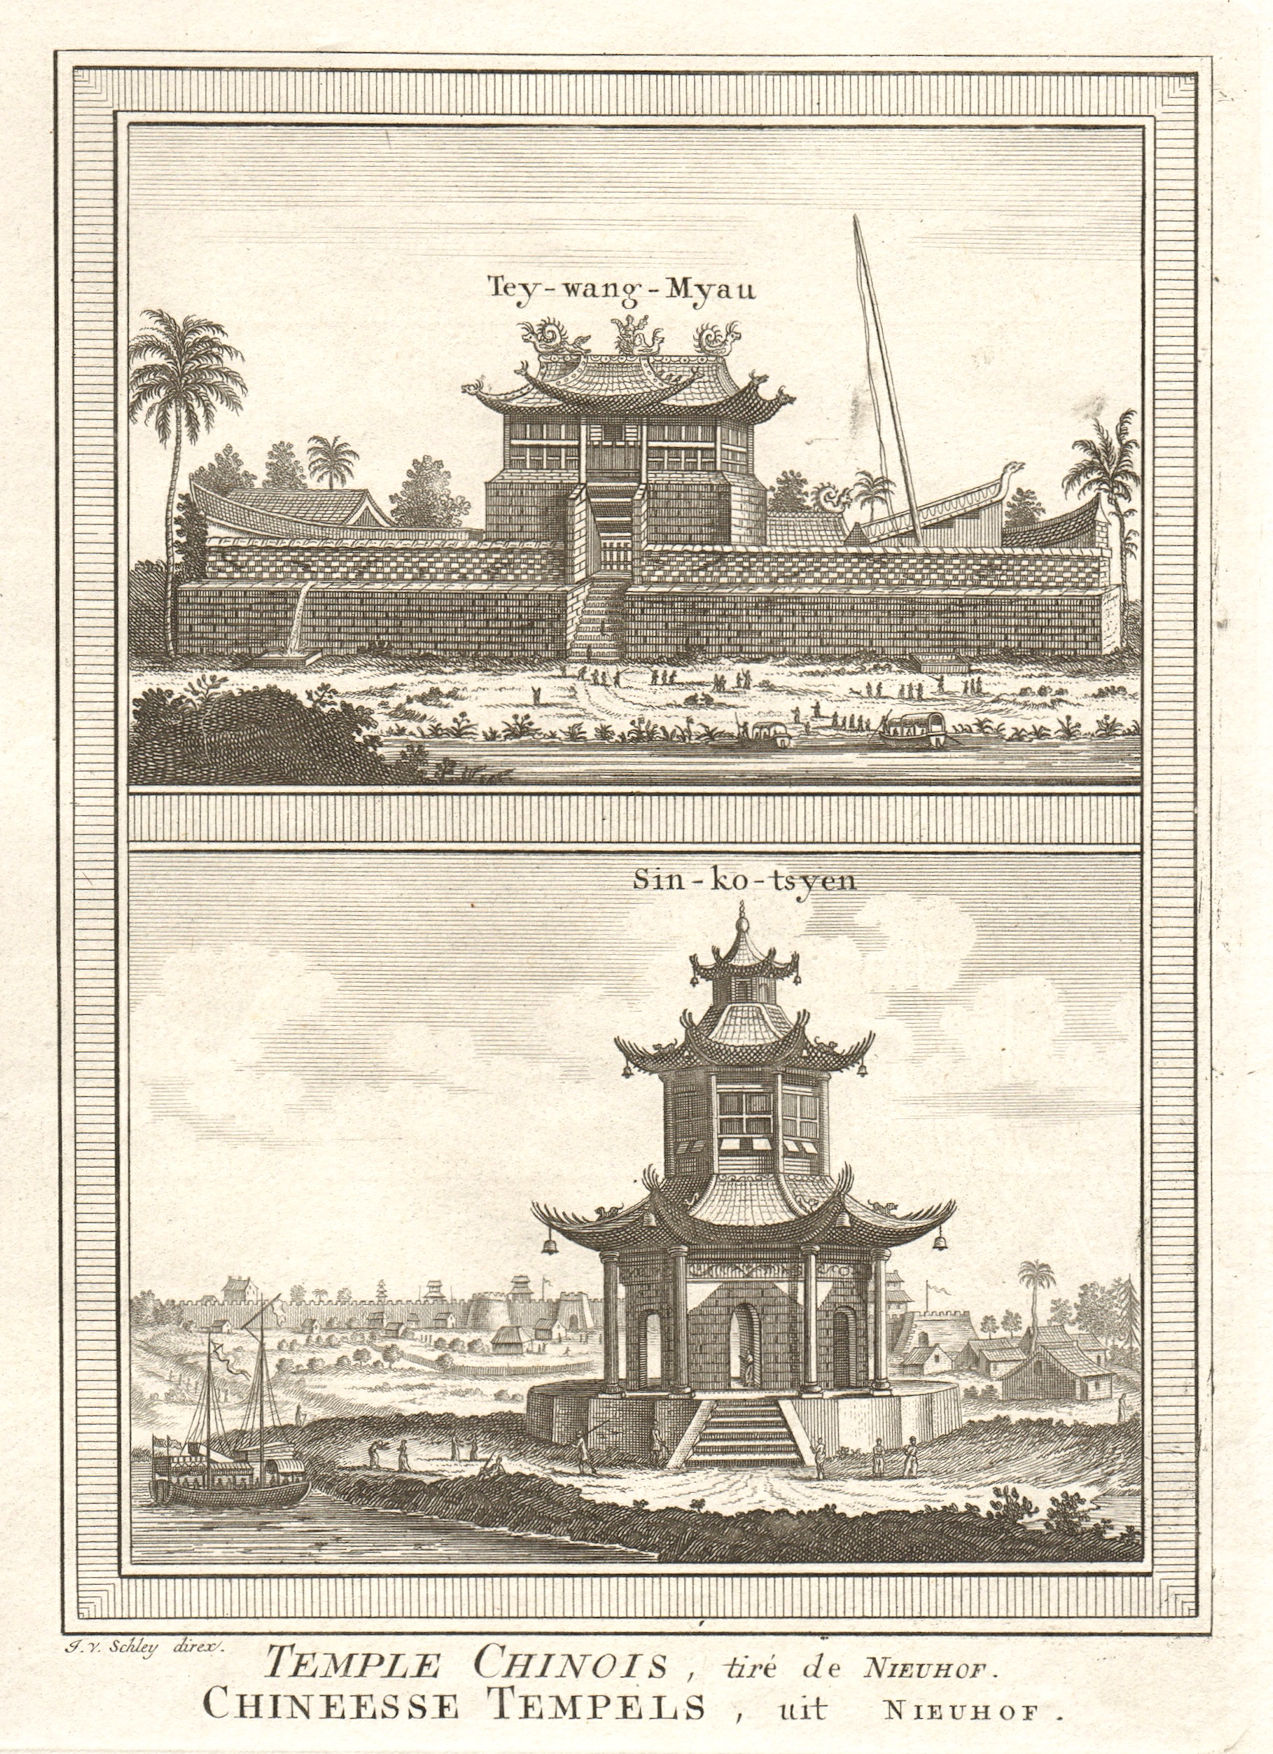 Associate Product Temples Chinois. China Chinese temples; Tey Wang Myan, Sin ko tsyen. SCHLEY 1749